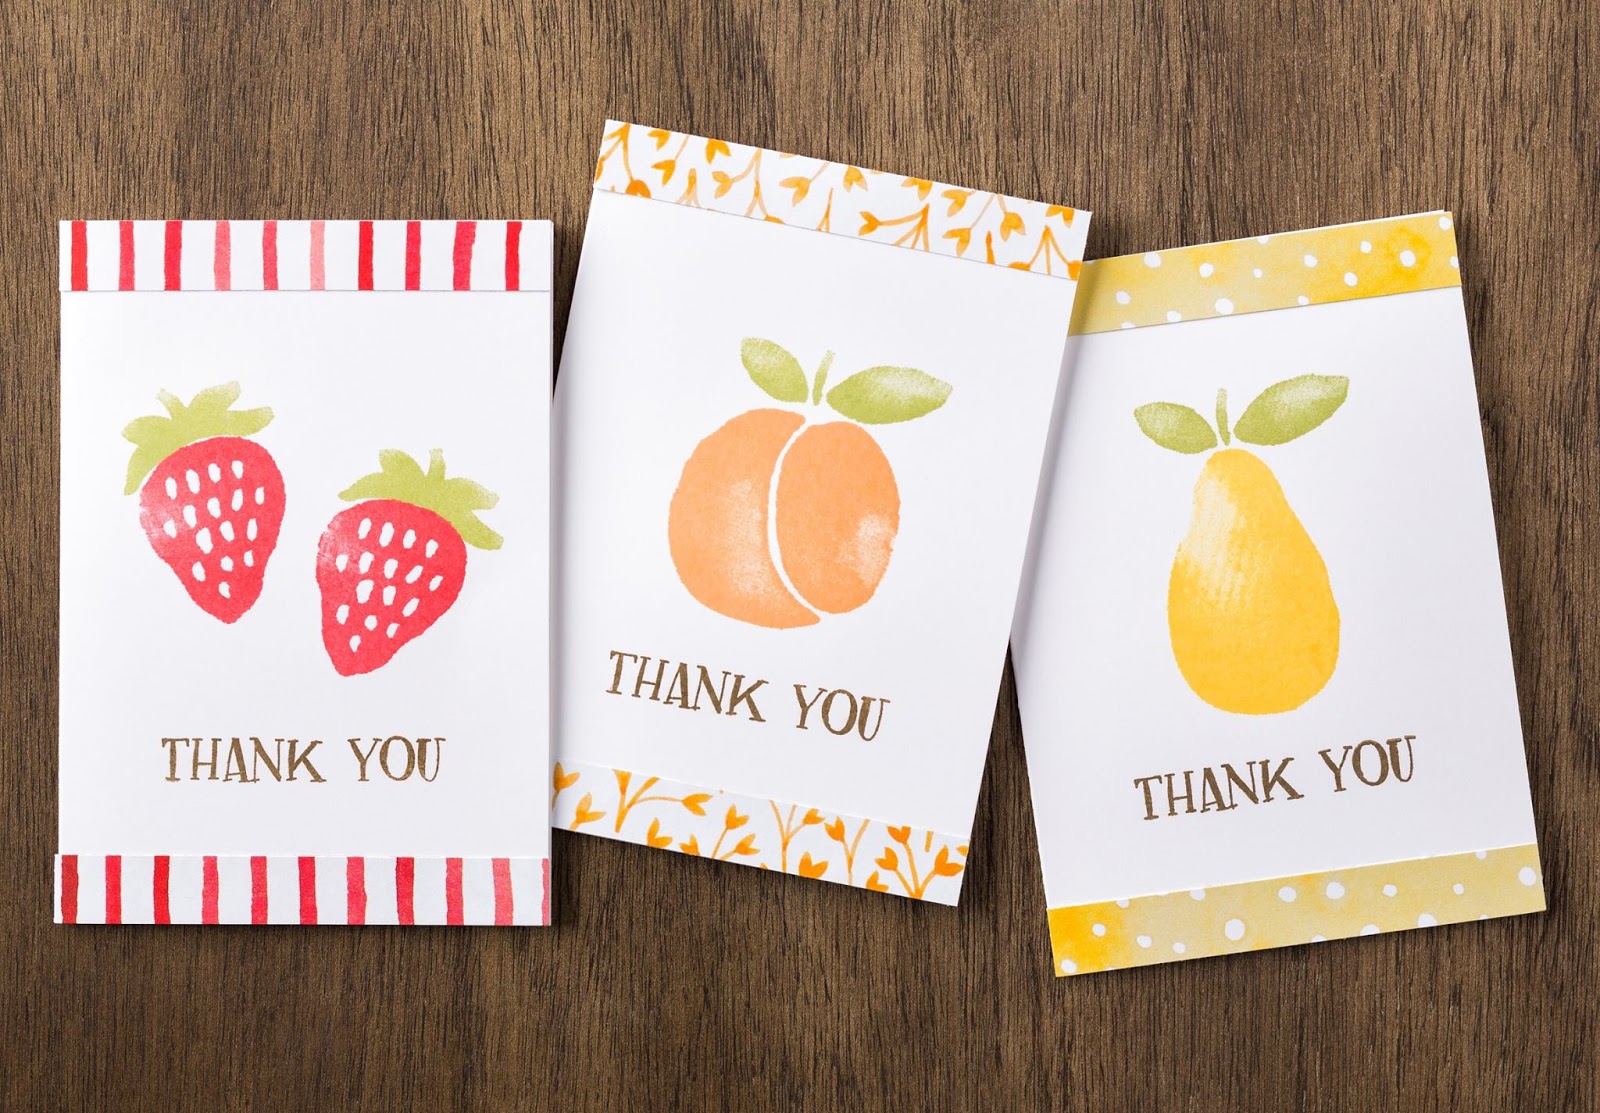 Stampin' Up! Fresh Fruit Thank You Note Cards with Fruit Stand Designer Paper #stampinup clean and simple www.juliedavison.com